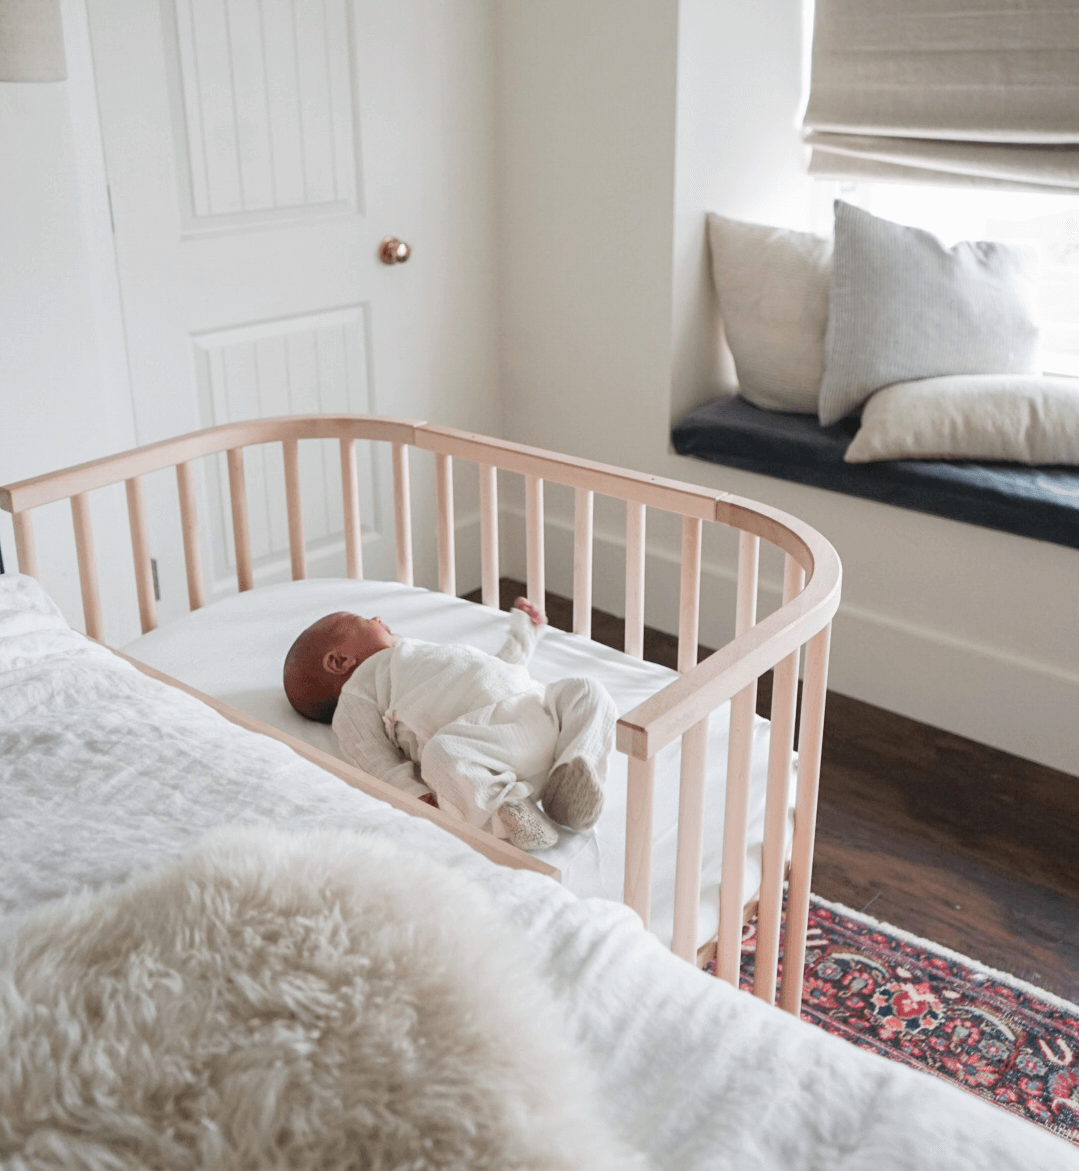 How to Co-Sleep with an Infant Safely Using a Bedside Sleeper